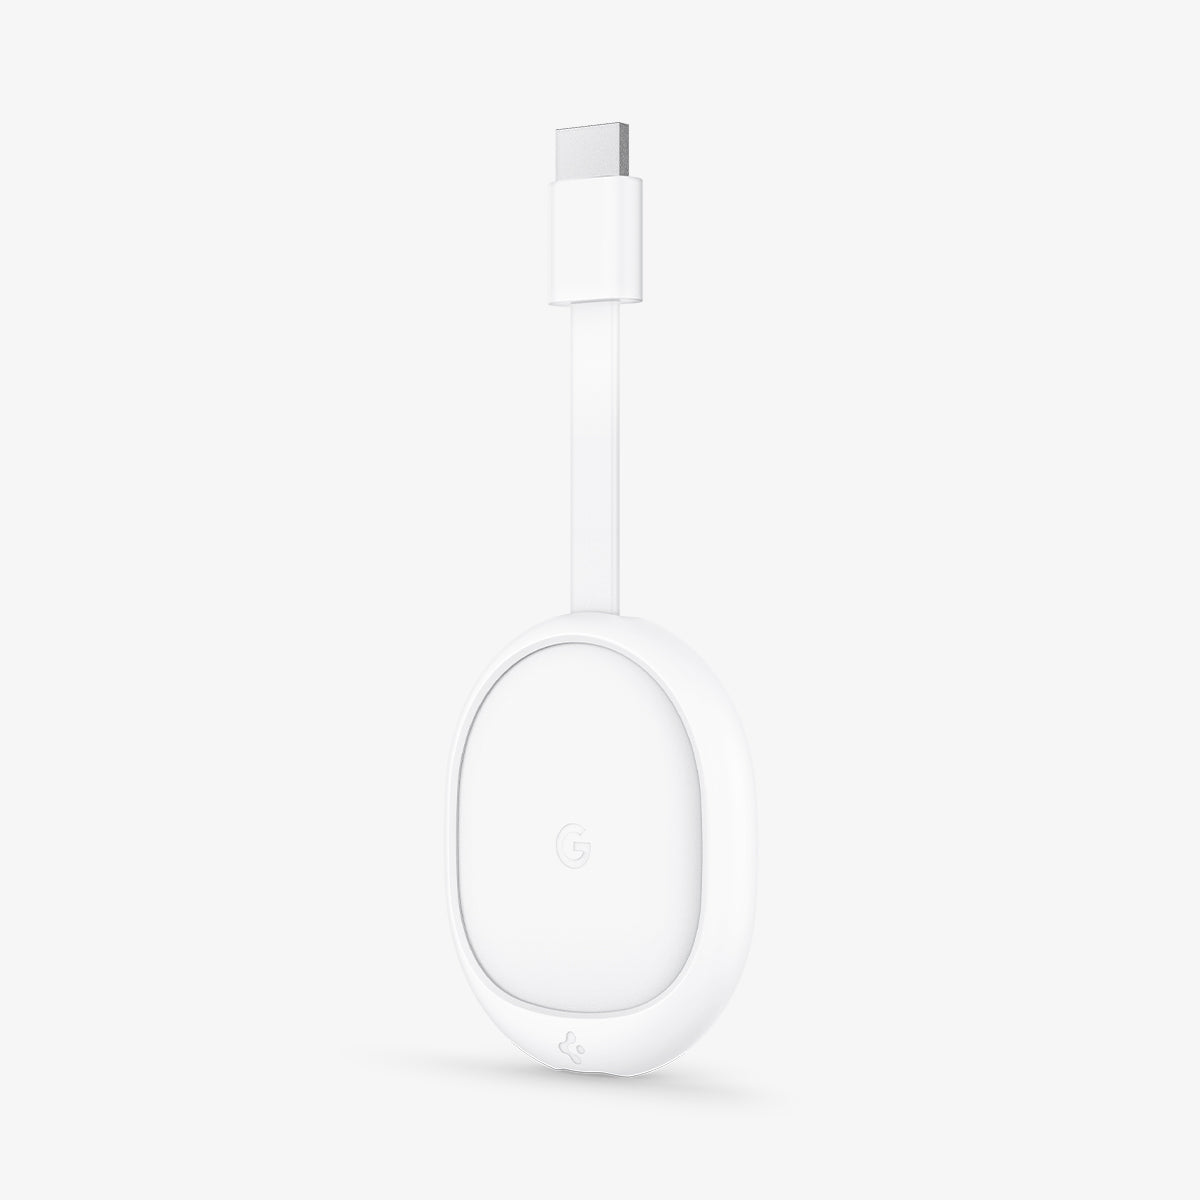 AMP02713 - Chromecast with Google TV Silicone Fit in white showing the front and partial side